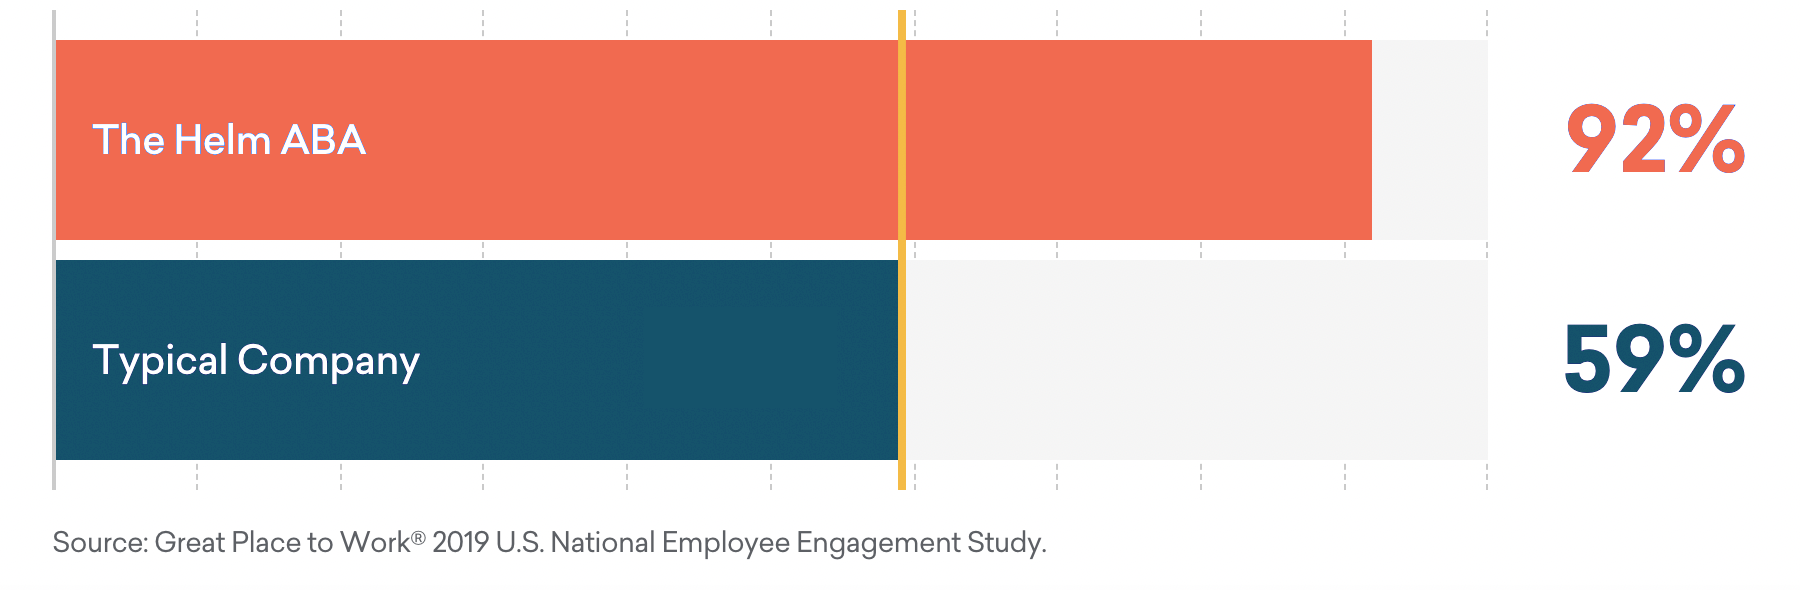 The Helm ABA, 92%. Typical company, 59%. Source: Great Place To Work 2019 U.S. National Employee Engagement Study.